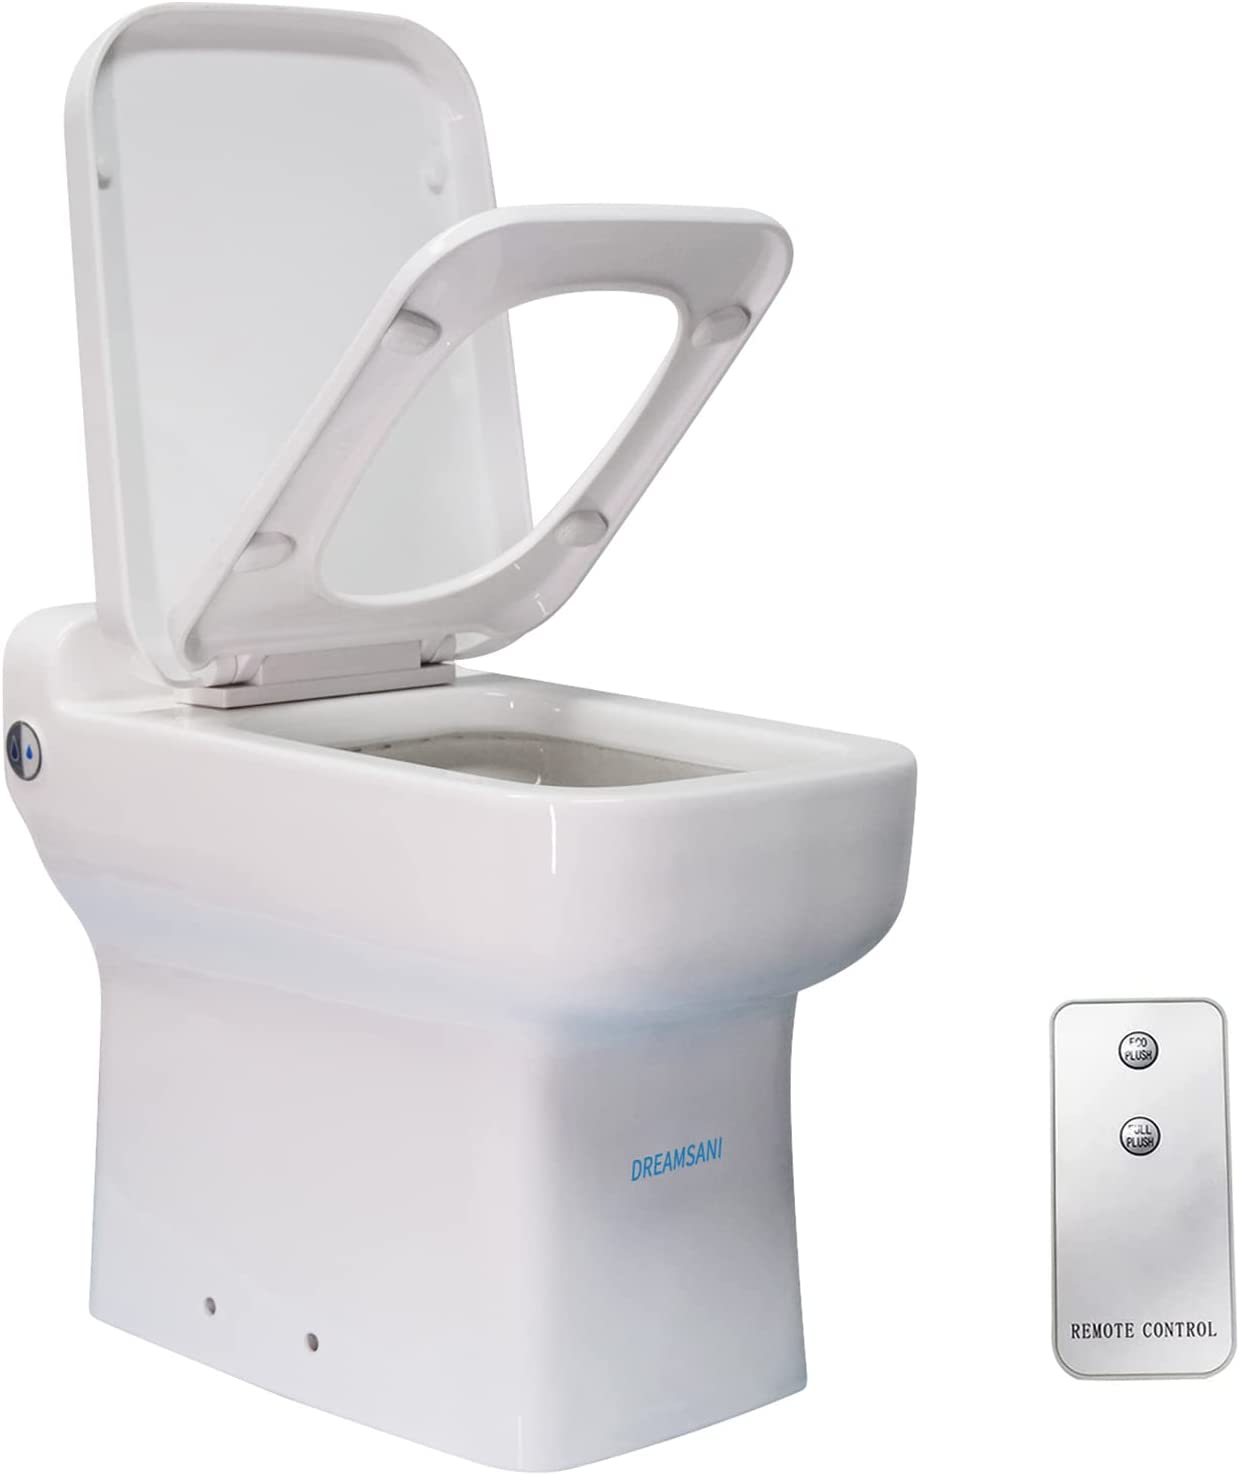 One-piece Remote Control Macerating Toilet for Small [...]